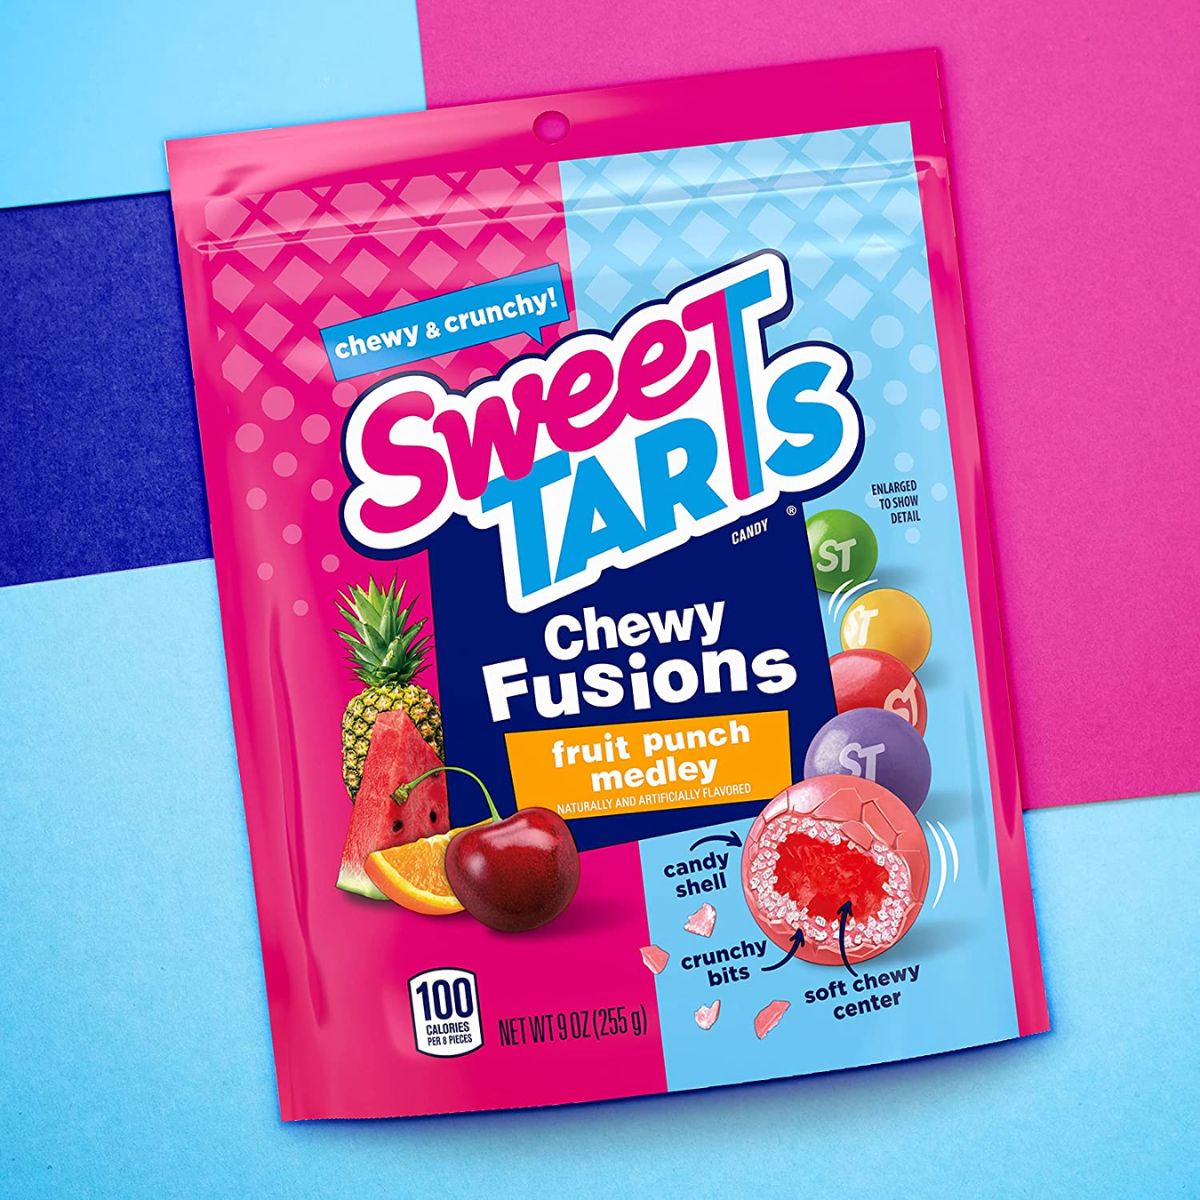 Sweetarts Chewy Fusions 9 oz Bag Fruit Punch Medley